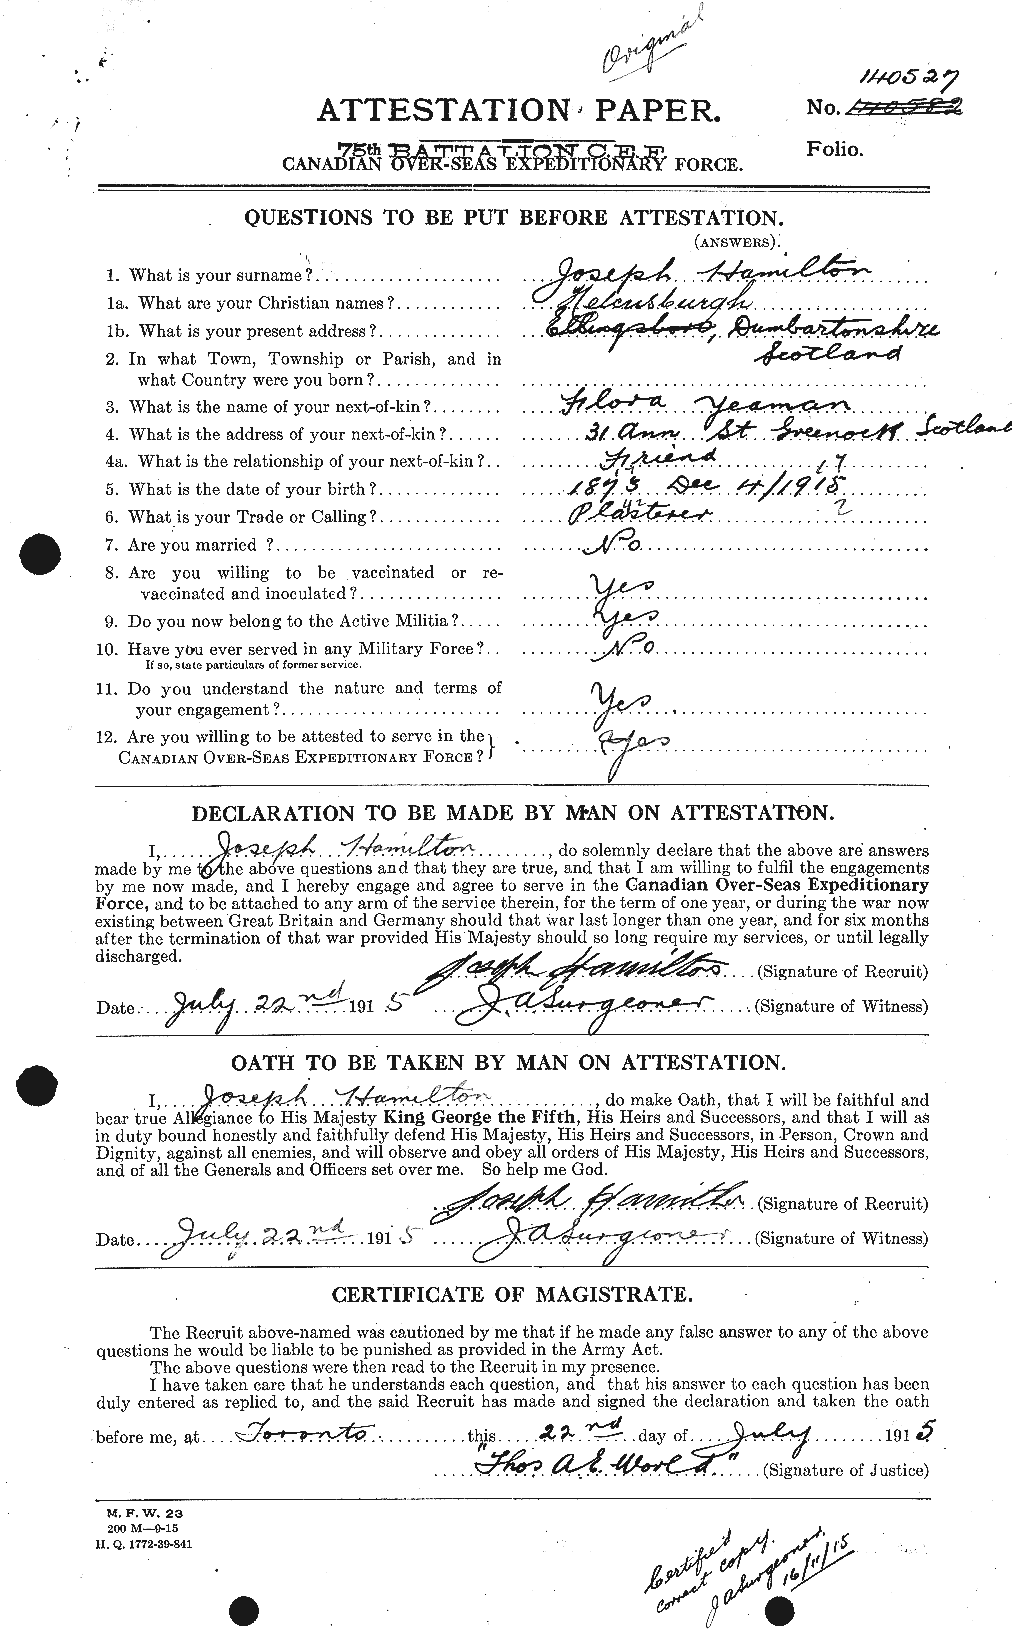 Personnel Records of the First World War - CEF 373136a